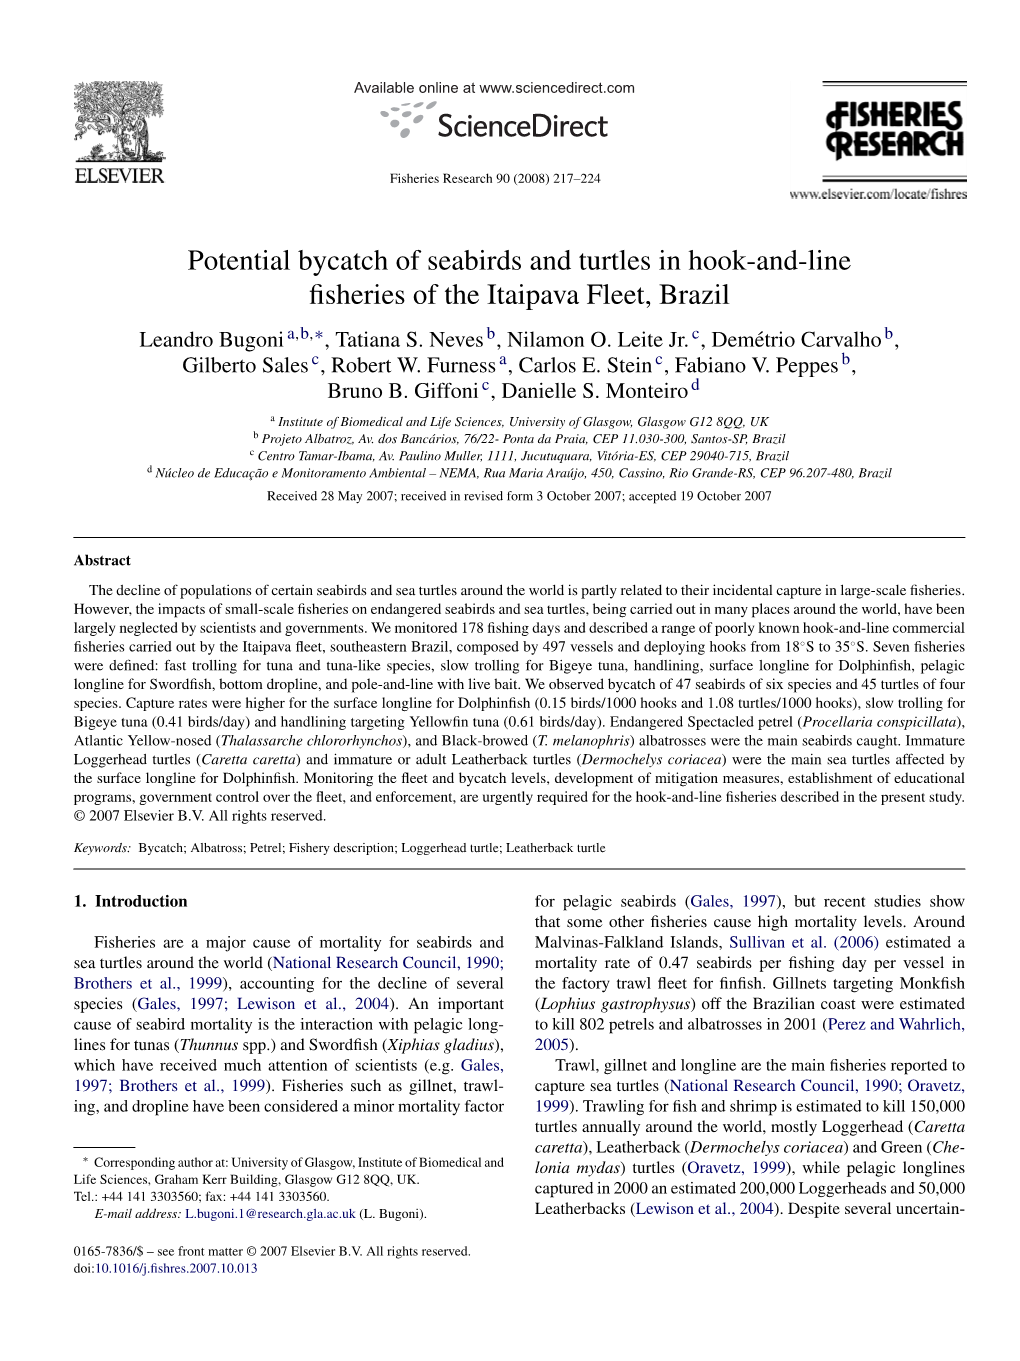 Potential Bycatch of Seabirds and Turtles in Hook-And-Line Fisheries Of